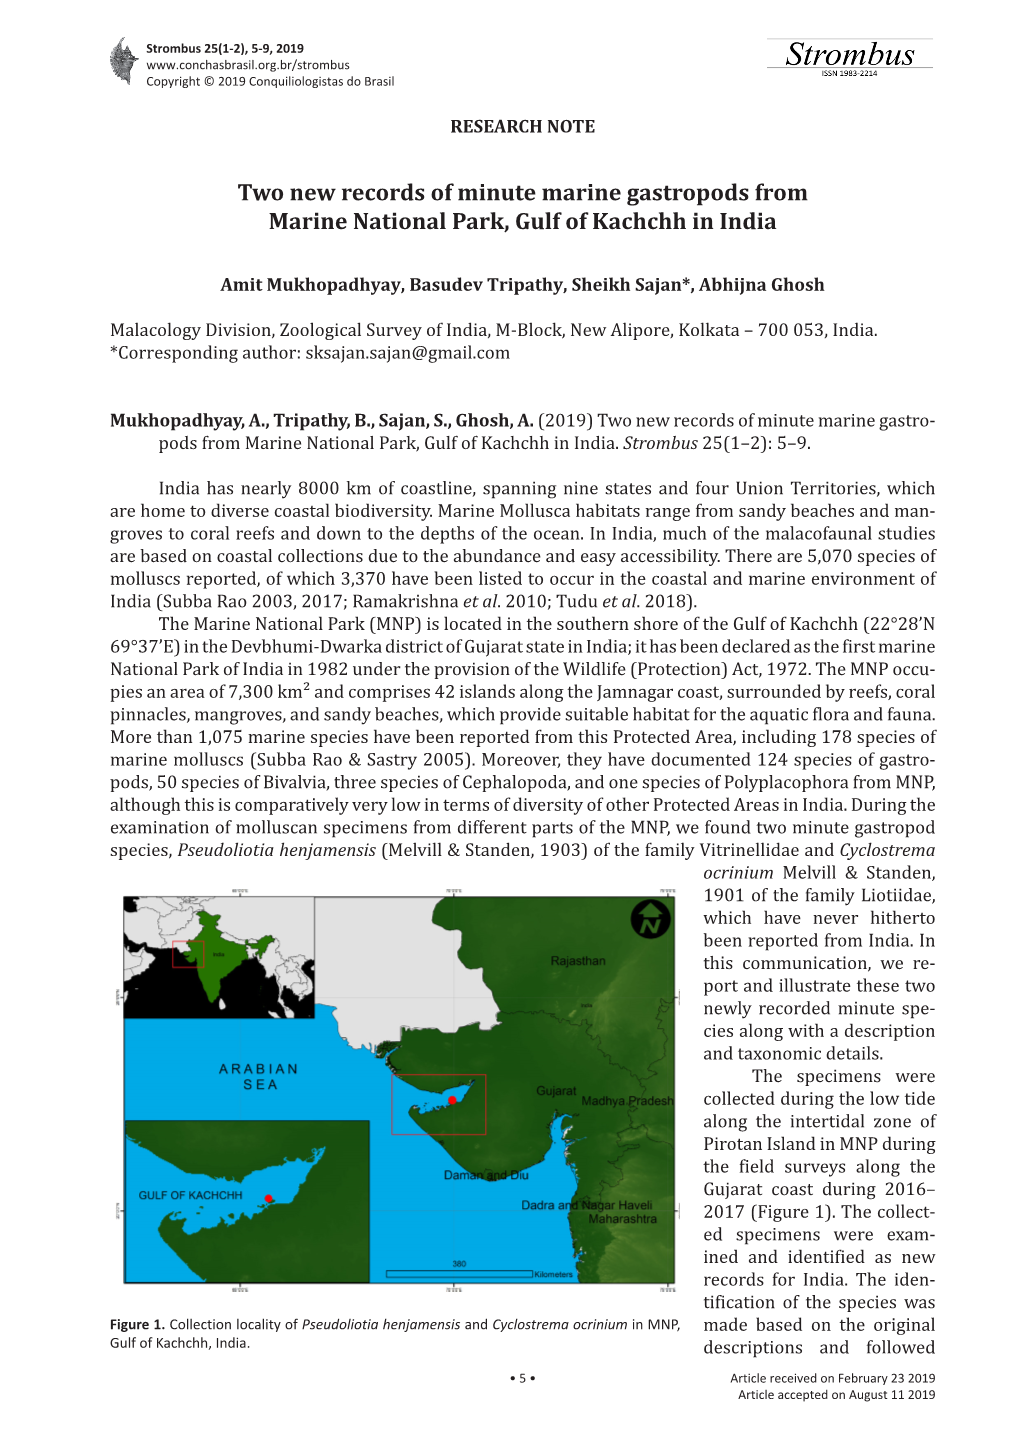 Two New Records of Minute Marine Gastropods from Marine National Park, Gulf of Kachchh in India